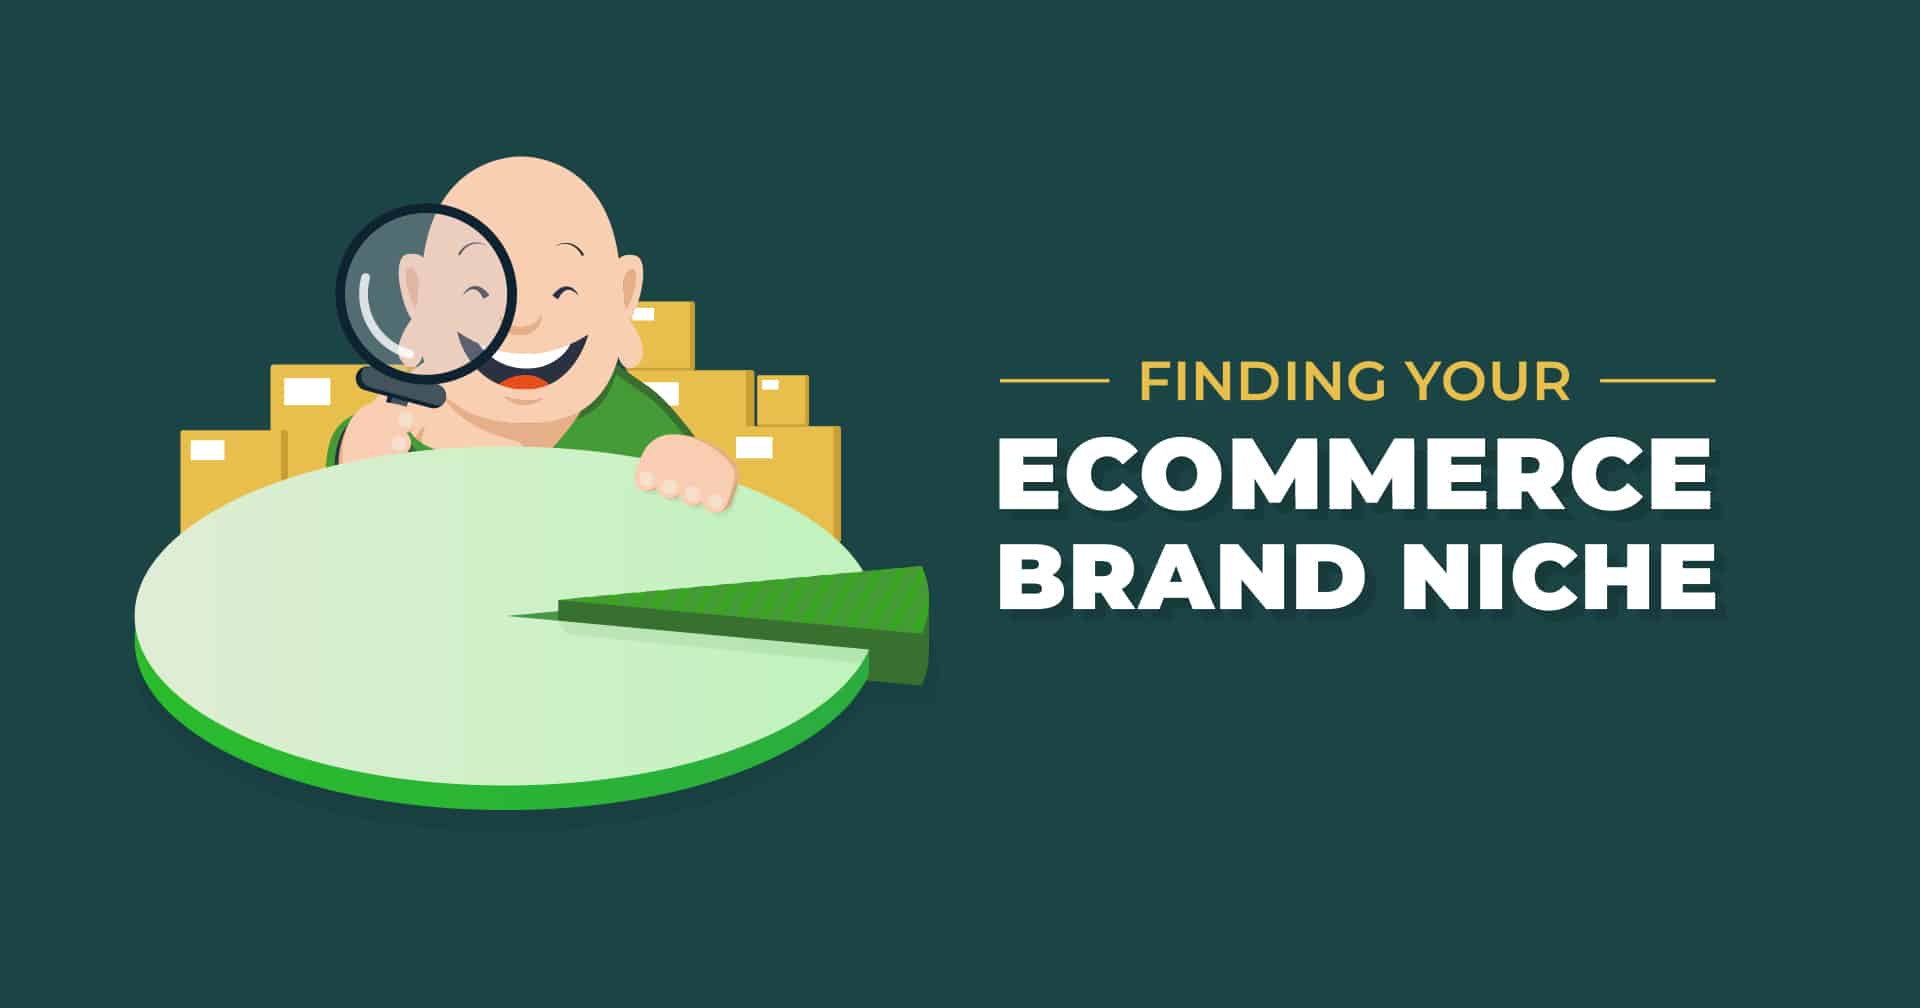 Finding Your Ecommerce Brand Niche